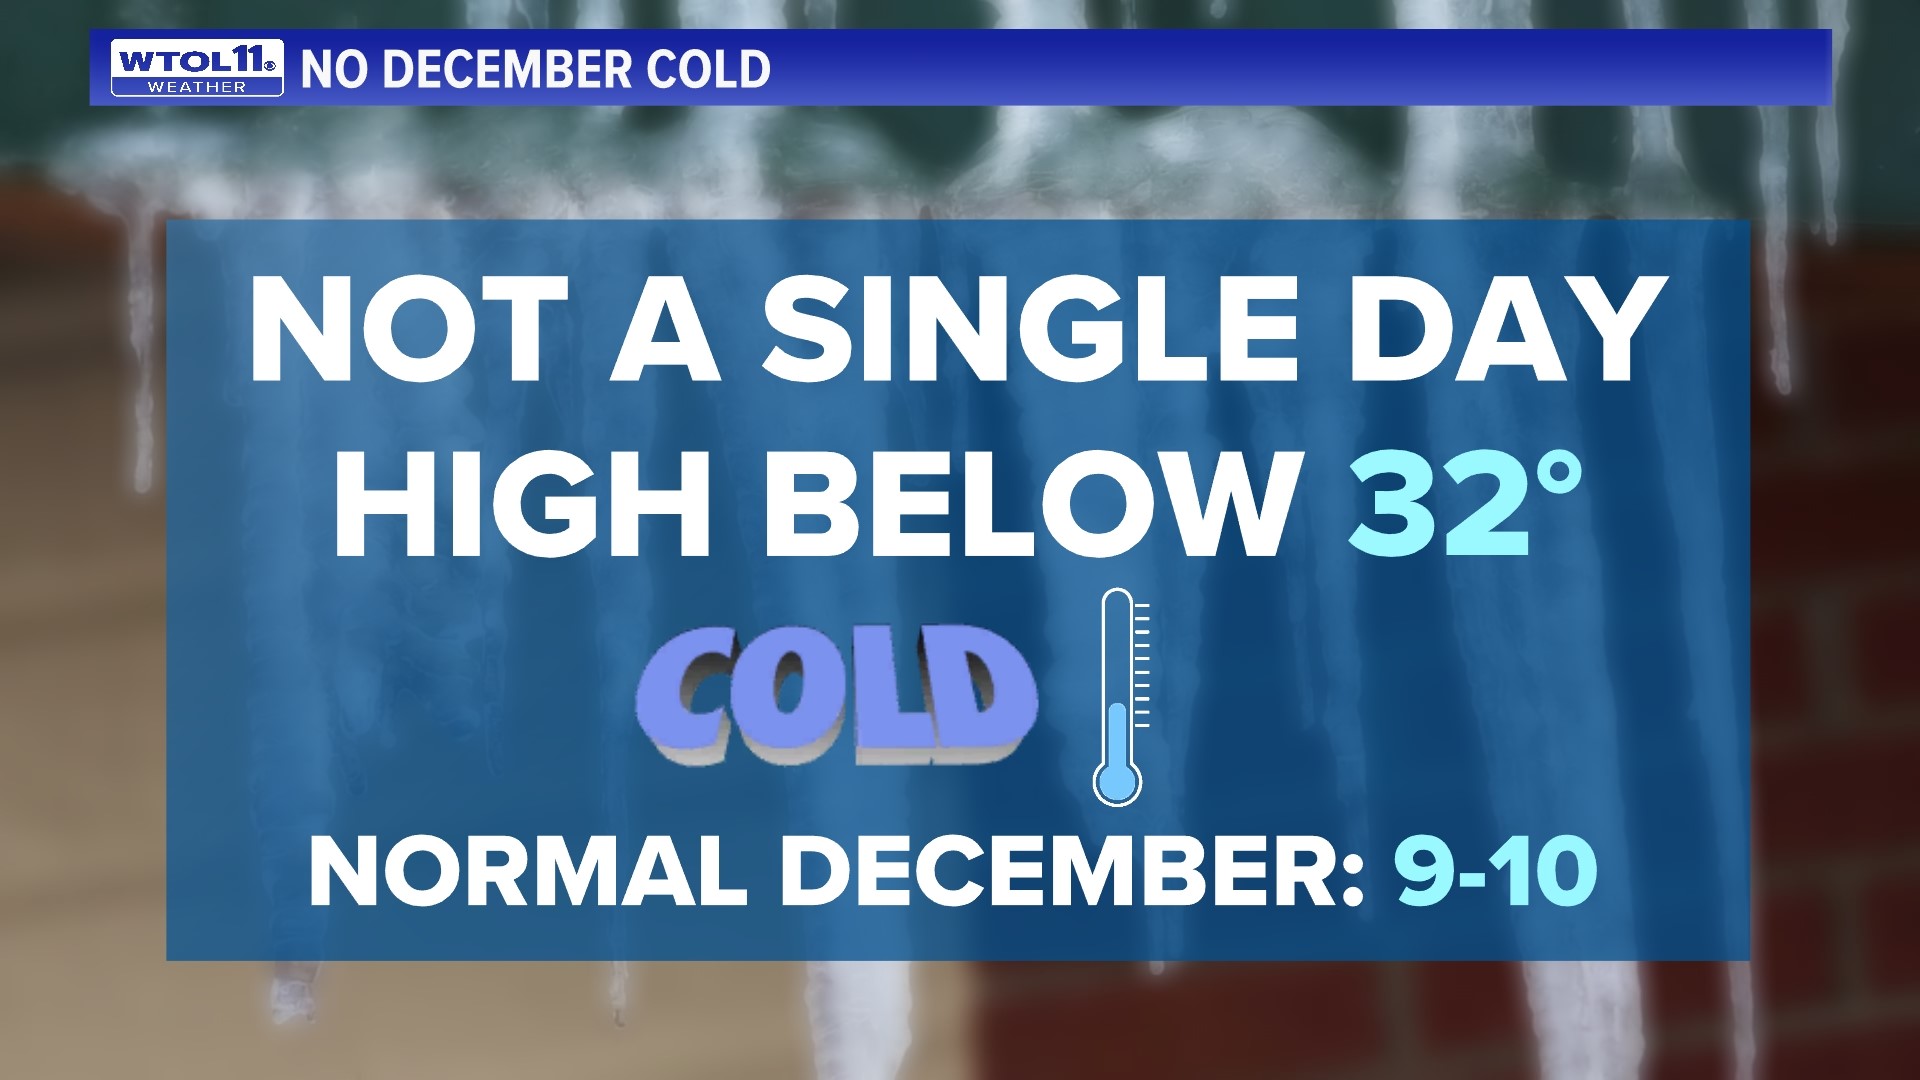 Historic December marked by warmth, lack of snow